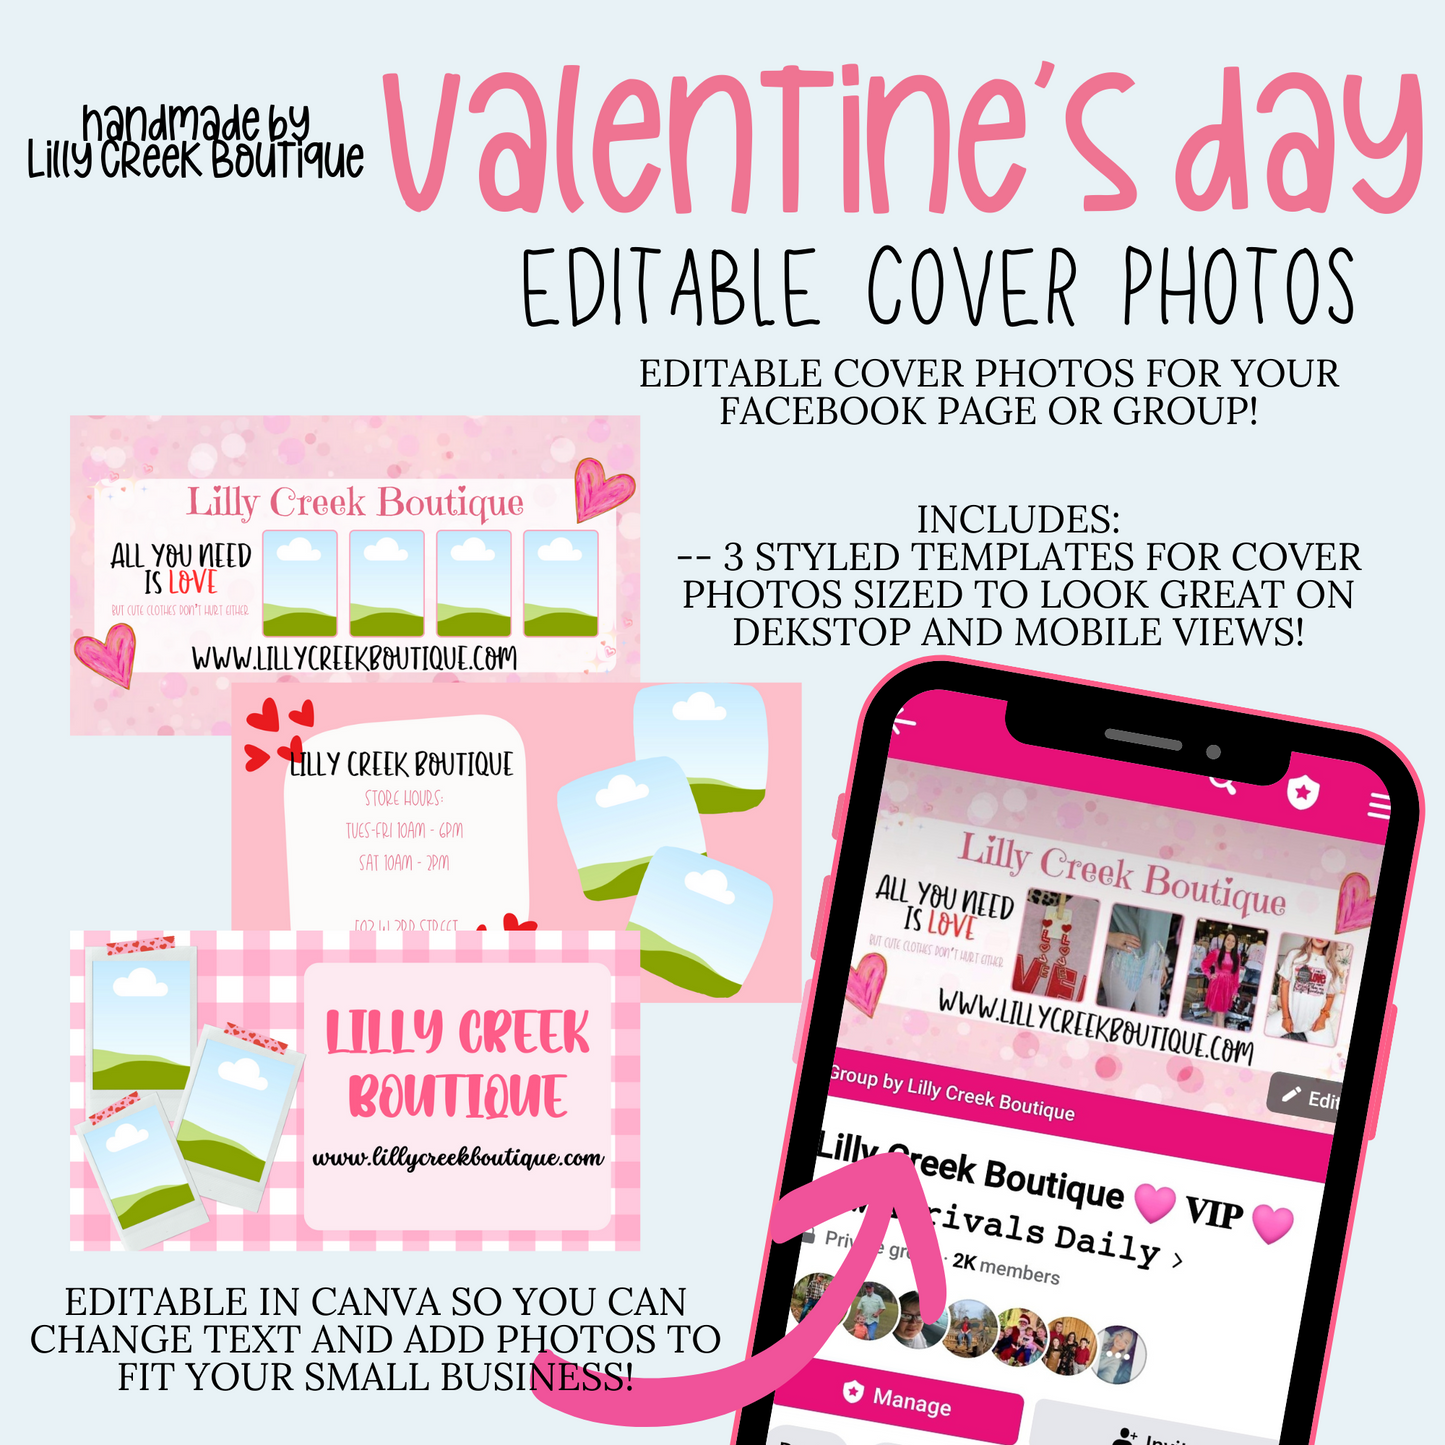 VALENTINE'S DAY COVER PHOTOS